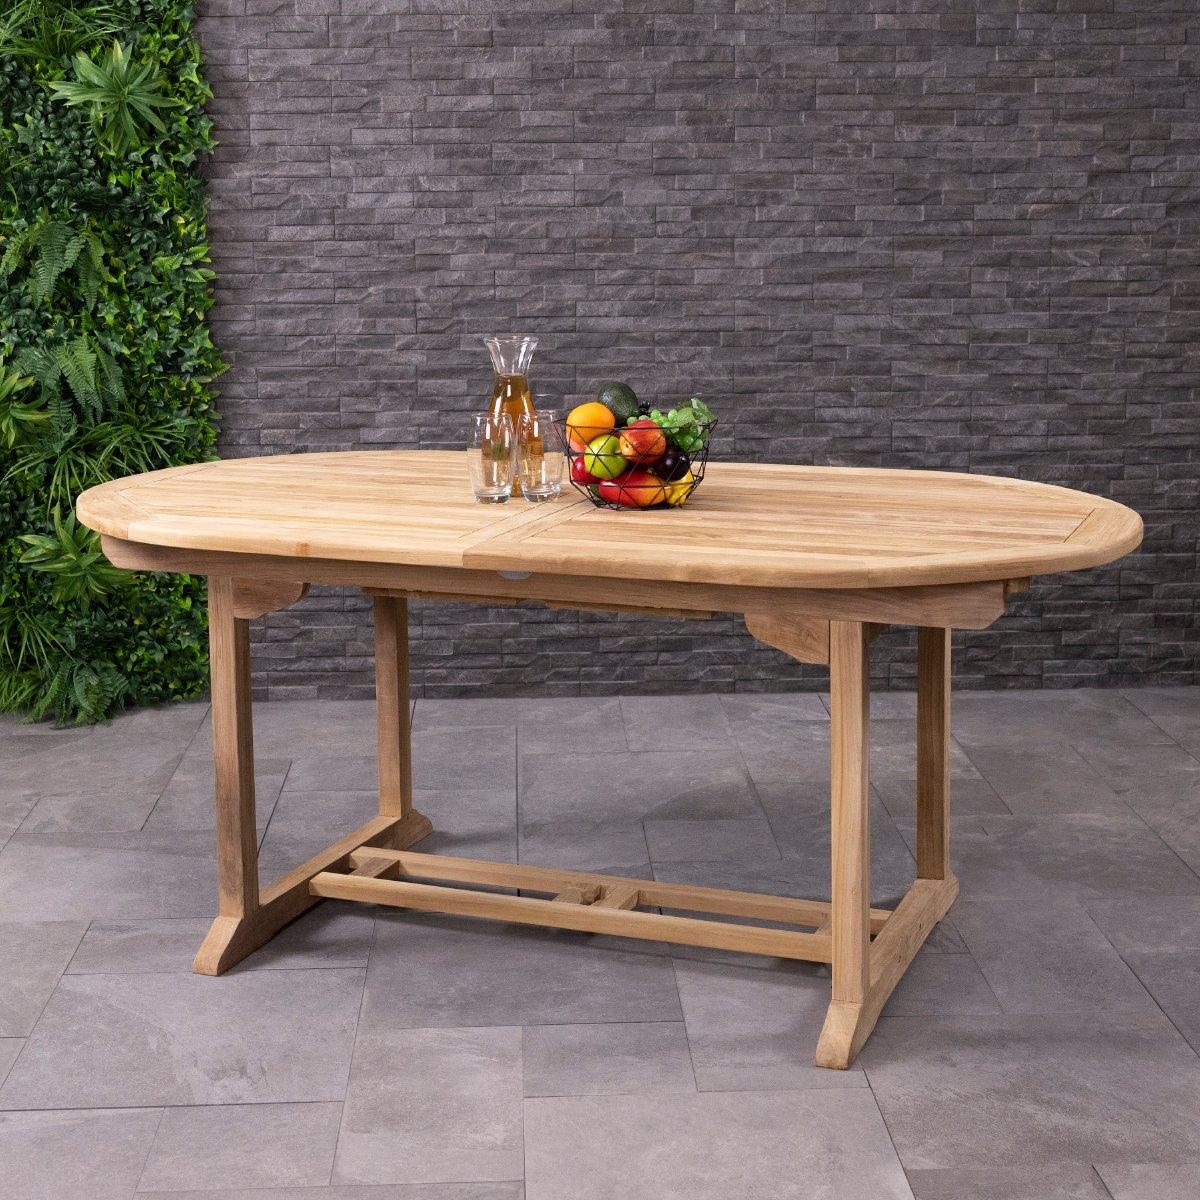 Solid Wooden Teak Garden Patio Oval 6-8 Seater Extendable Table